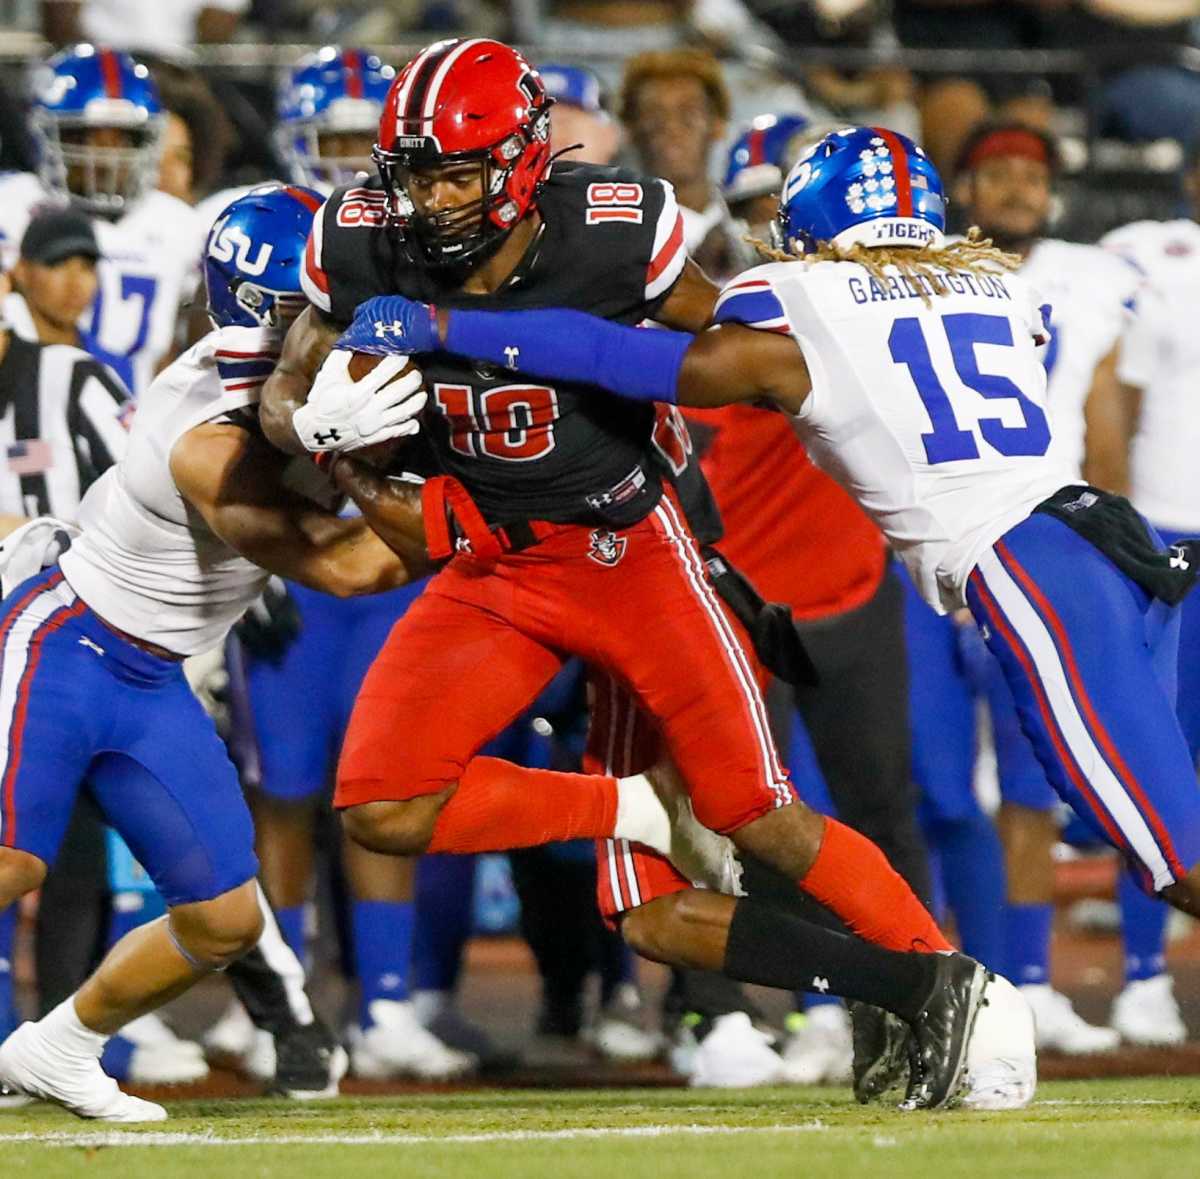 Austin Peay Governors wide receiver Joshua DeCambre (18) pushes through a group of Tennessee State Tigers in an OVC football game between the Austin Peay Governors and Tennessee State Tigers at Fortera Stadium in Clarksville, Tenn., on Saturday, Oct. 2, 2021.